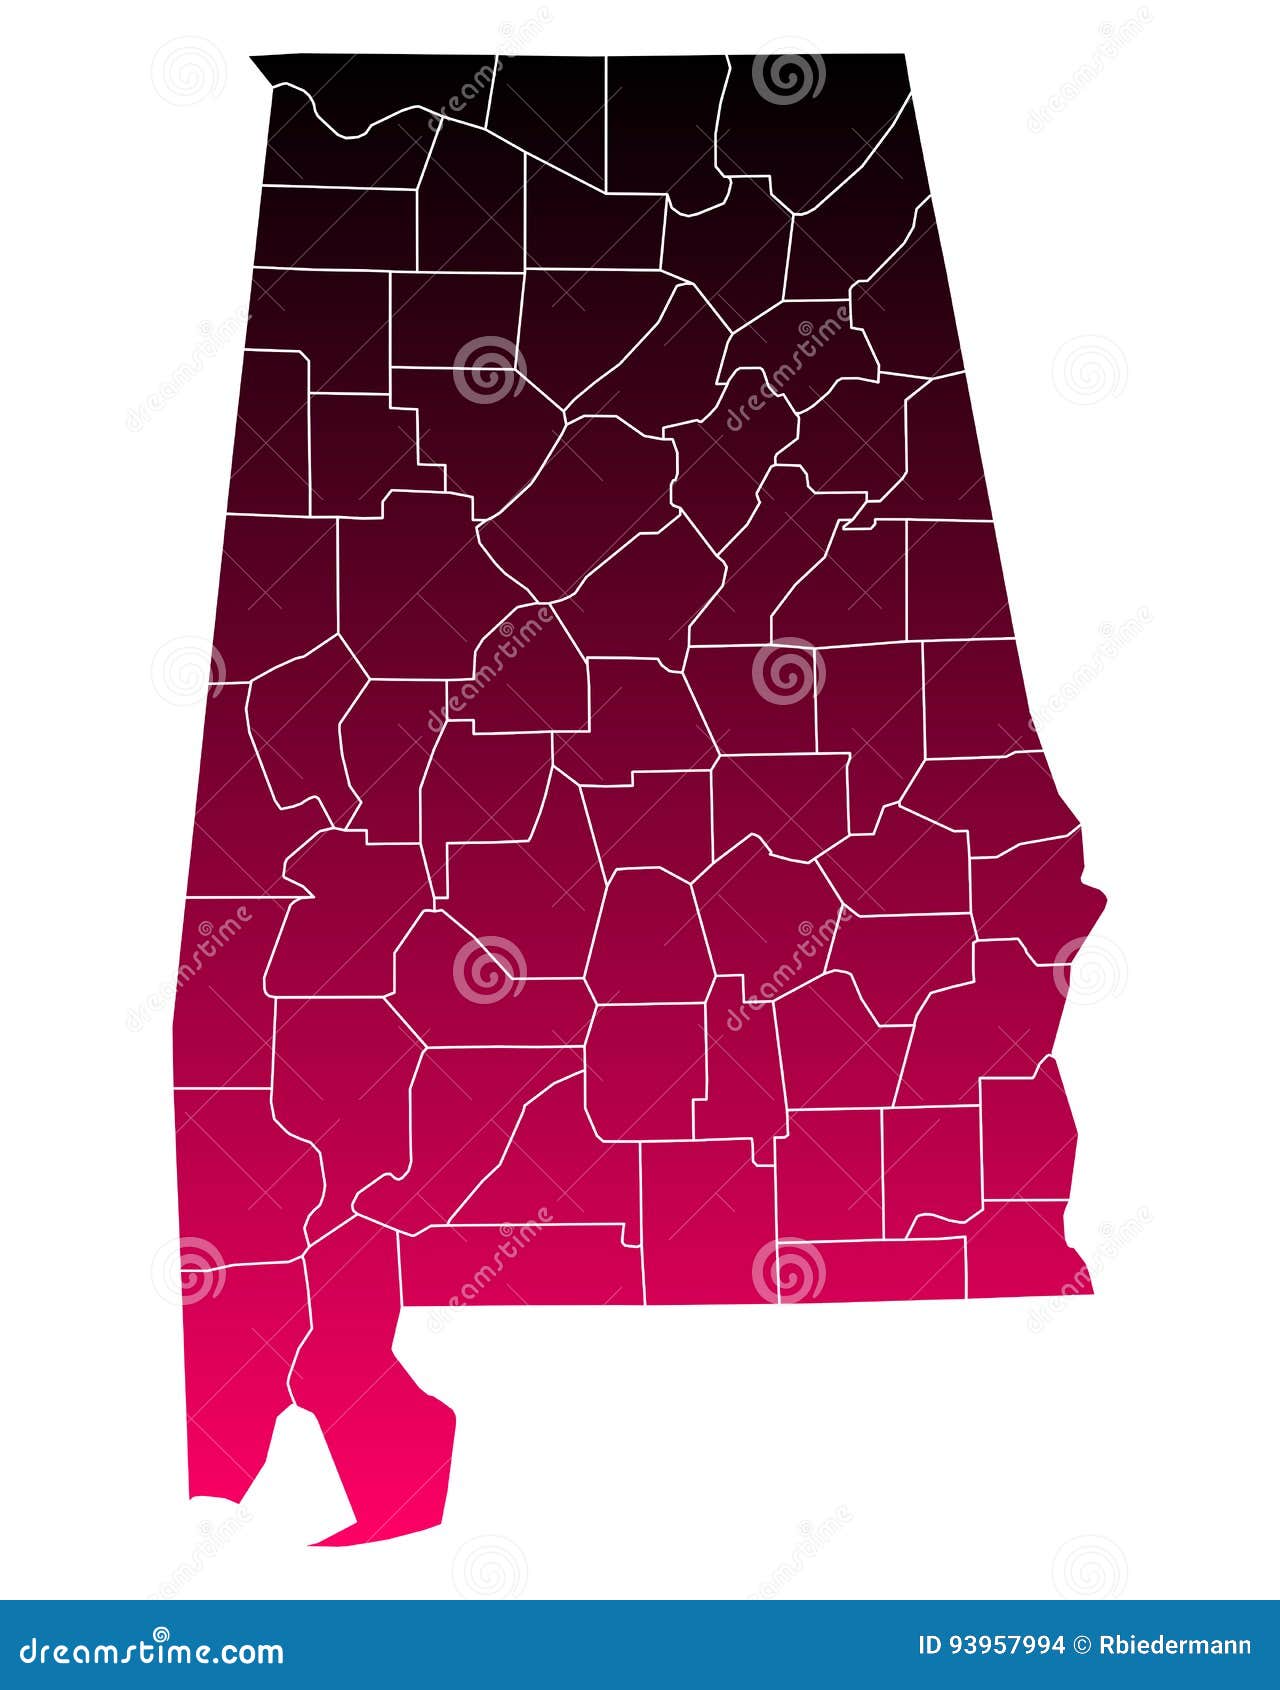 Map Of Alabama Stock Vector Illustration Of Counties 93957994